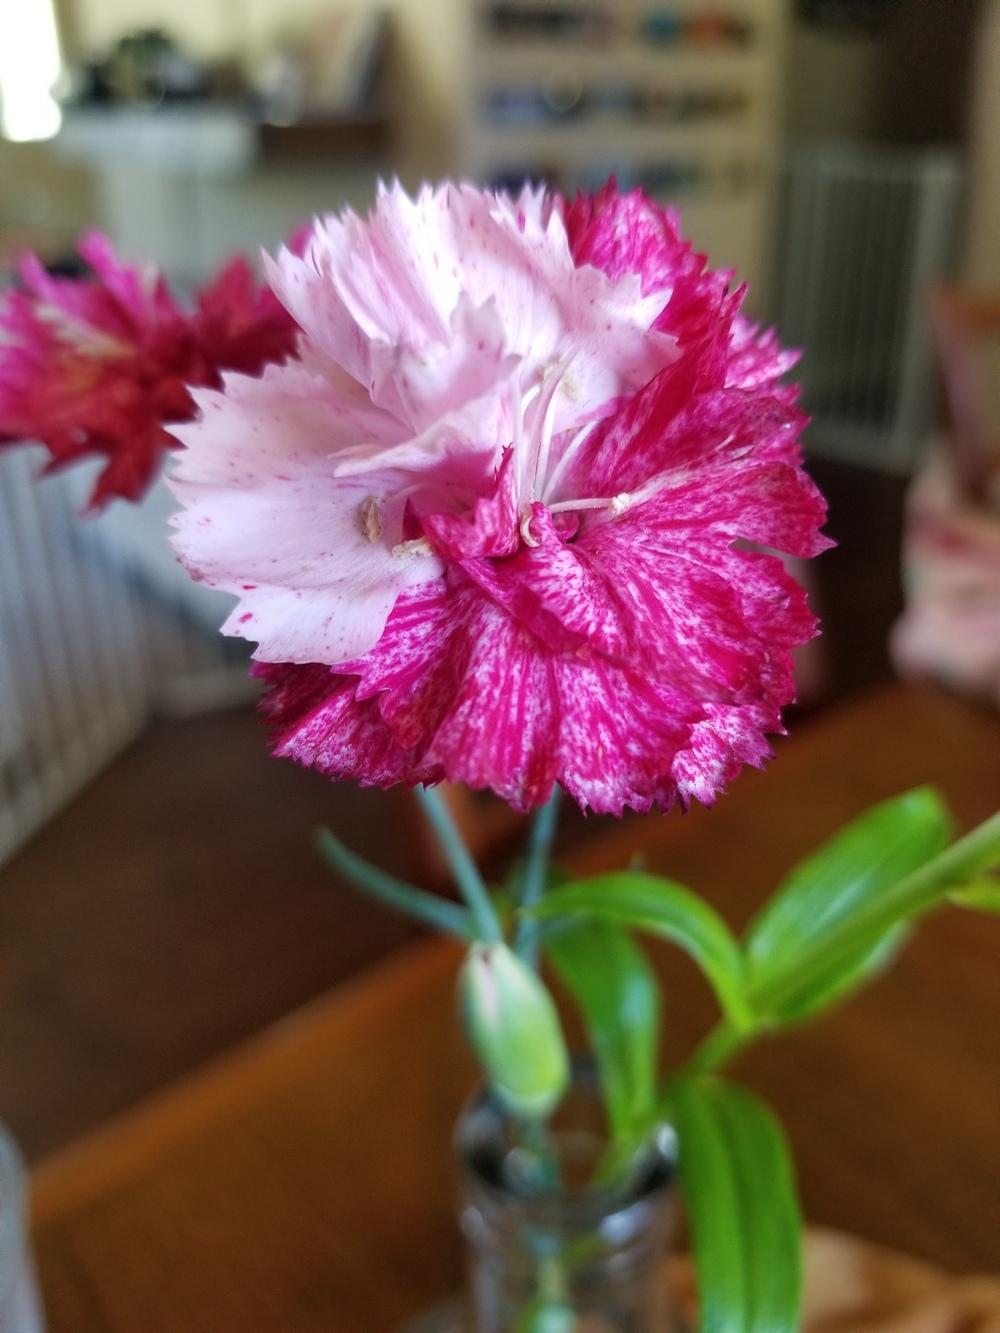 Photo of Dianthus uploaded by Joa922010